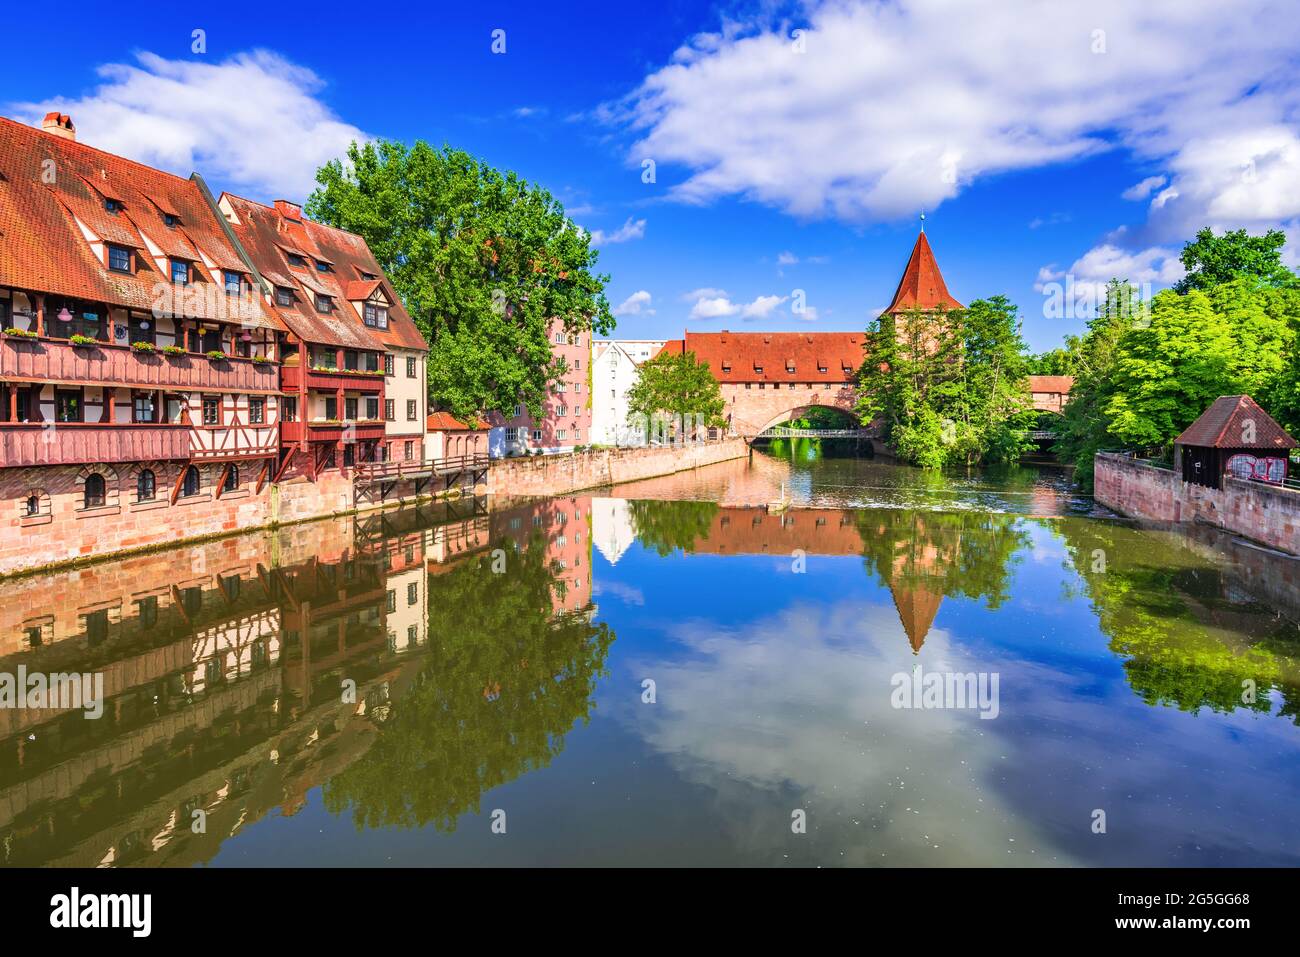 Nuremberg, Germany. Colourful and picturesque view of the Schlayerturm on the banks of the Pegnitz river. Tourist attractions in Franconia, Bavaria. Stock Photo